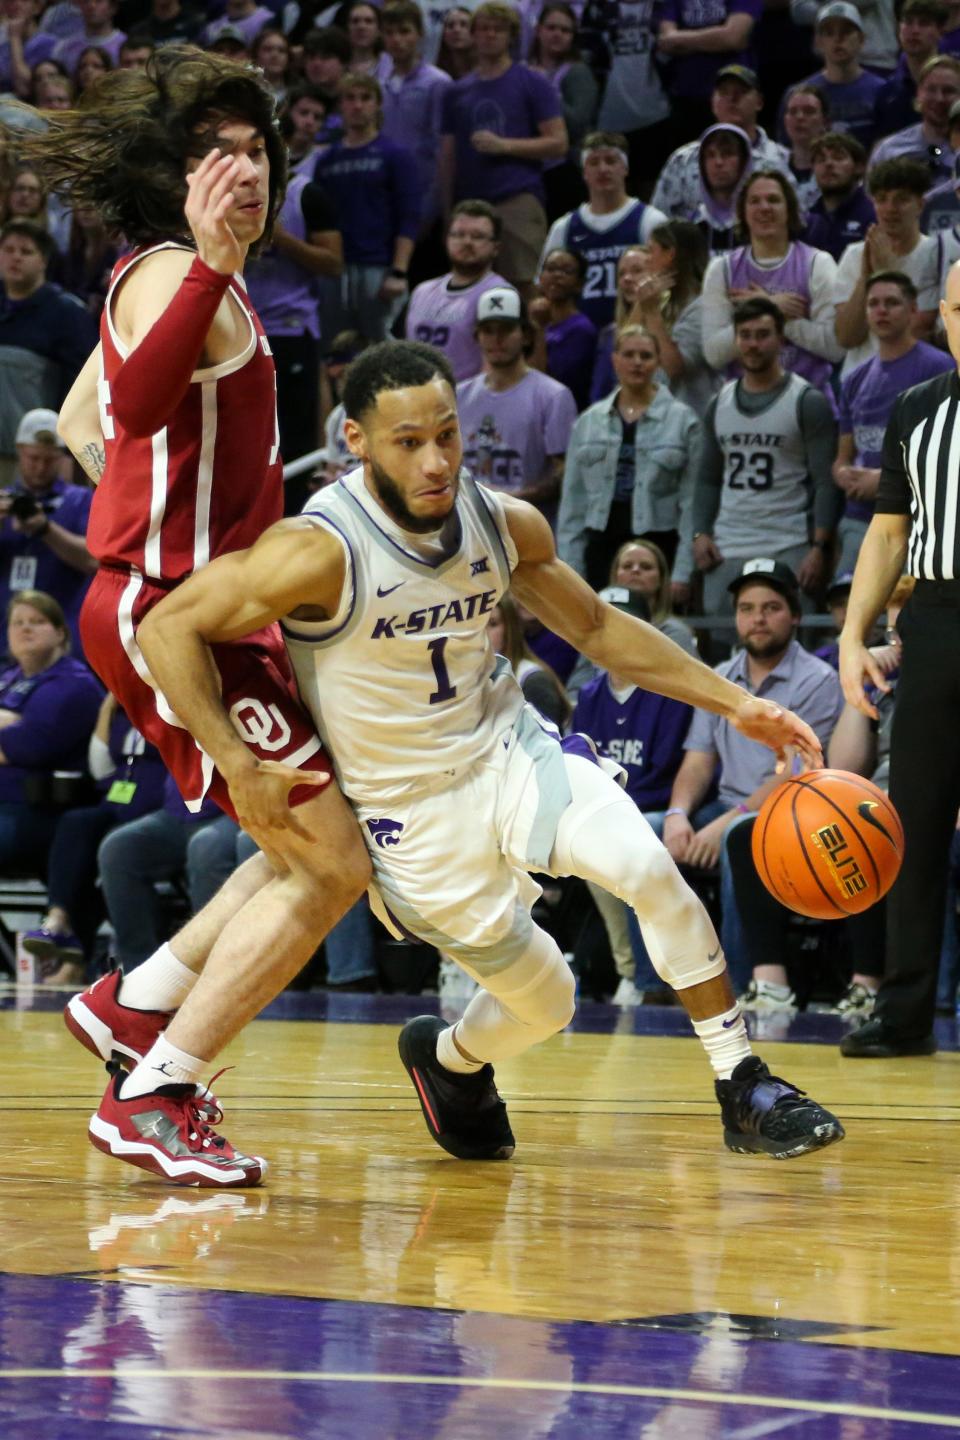 Kansas State guard Markquis Nowell (1) dribbles past Oklahoma's Bijan Cortes (14) on Wednesday night at Bramlage Coliseum. Nowell had 11 points and 10 assists in the Wildcats' 85-69 victory.